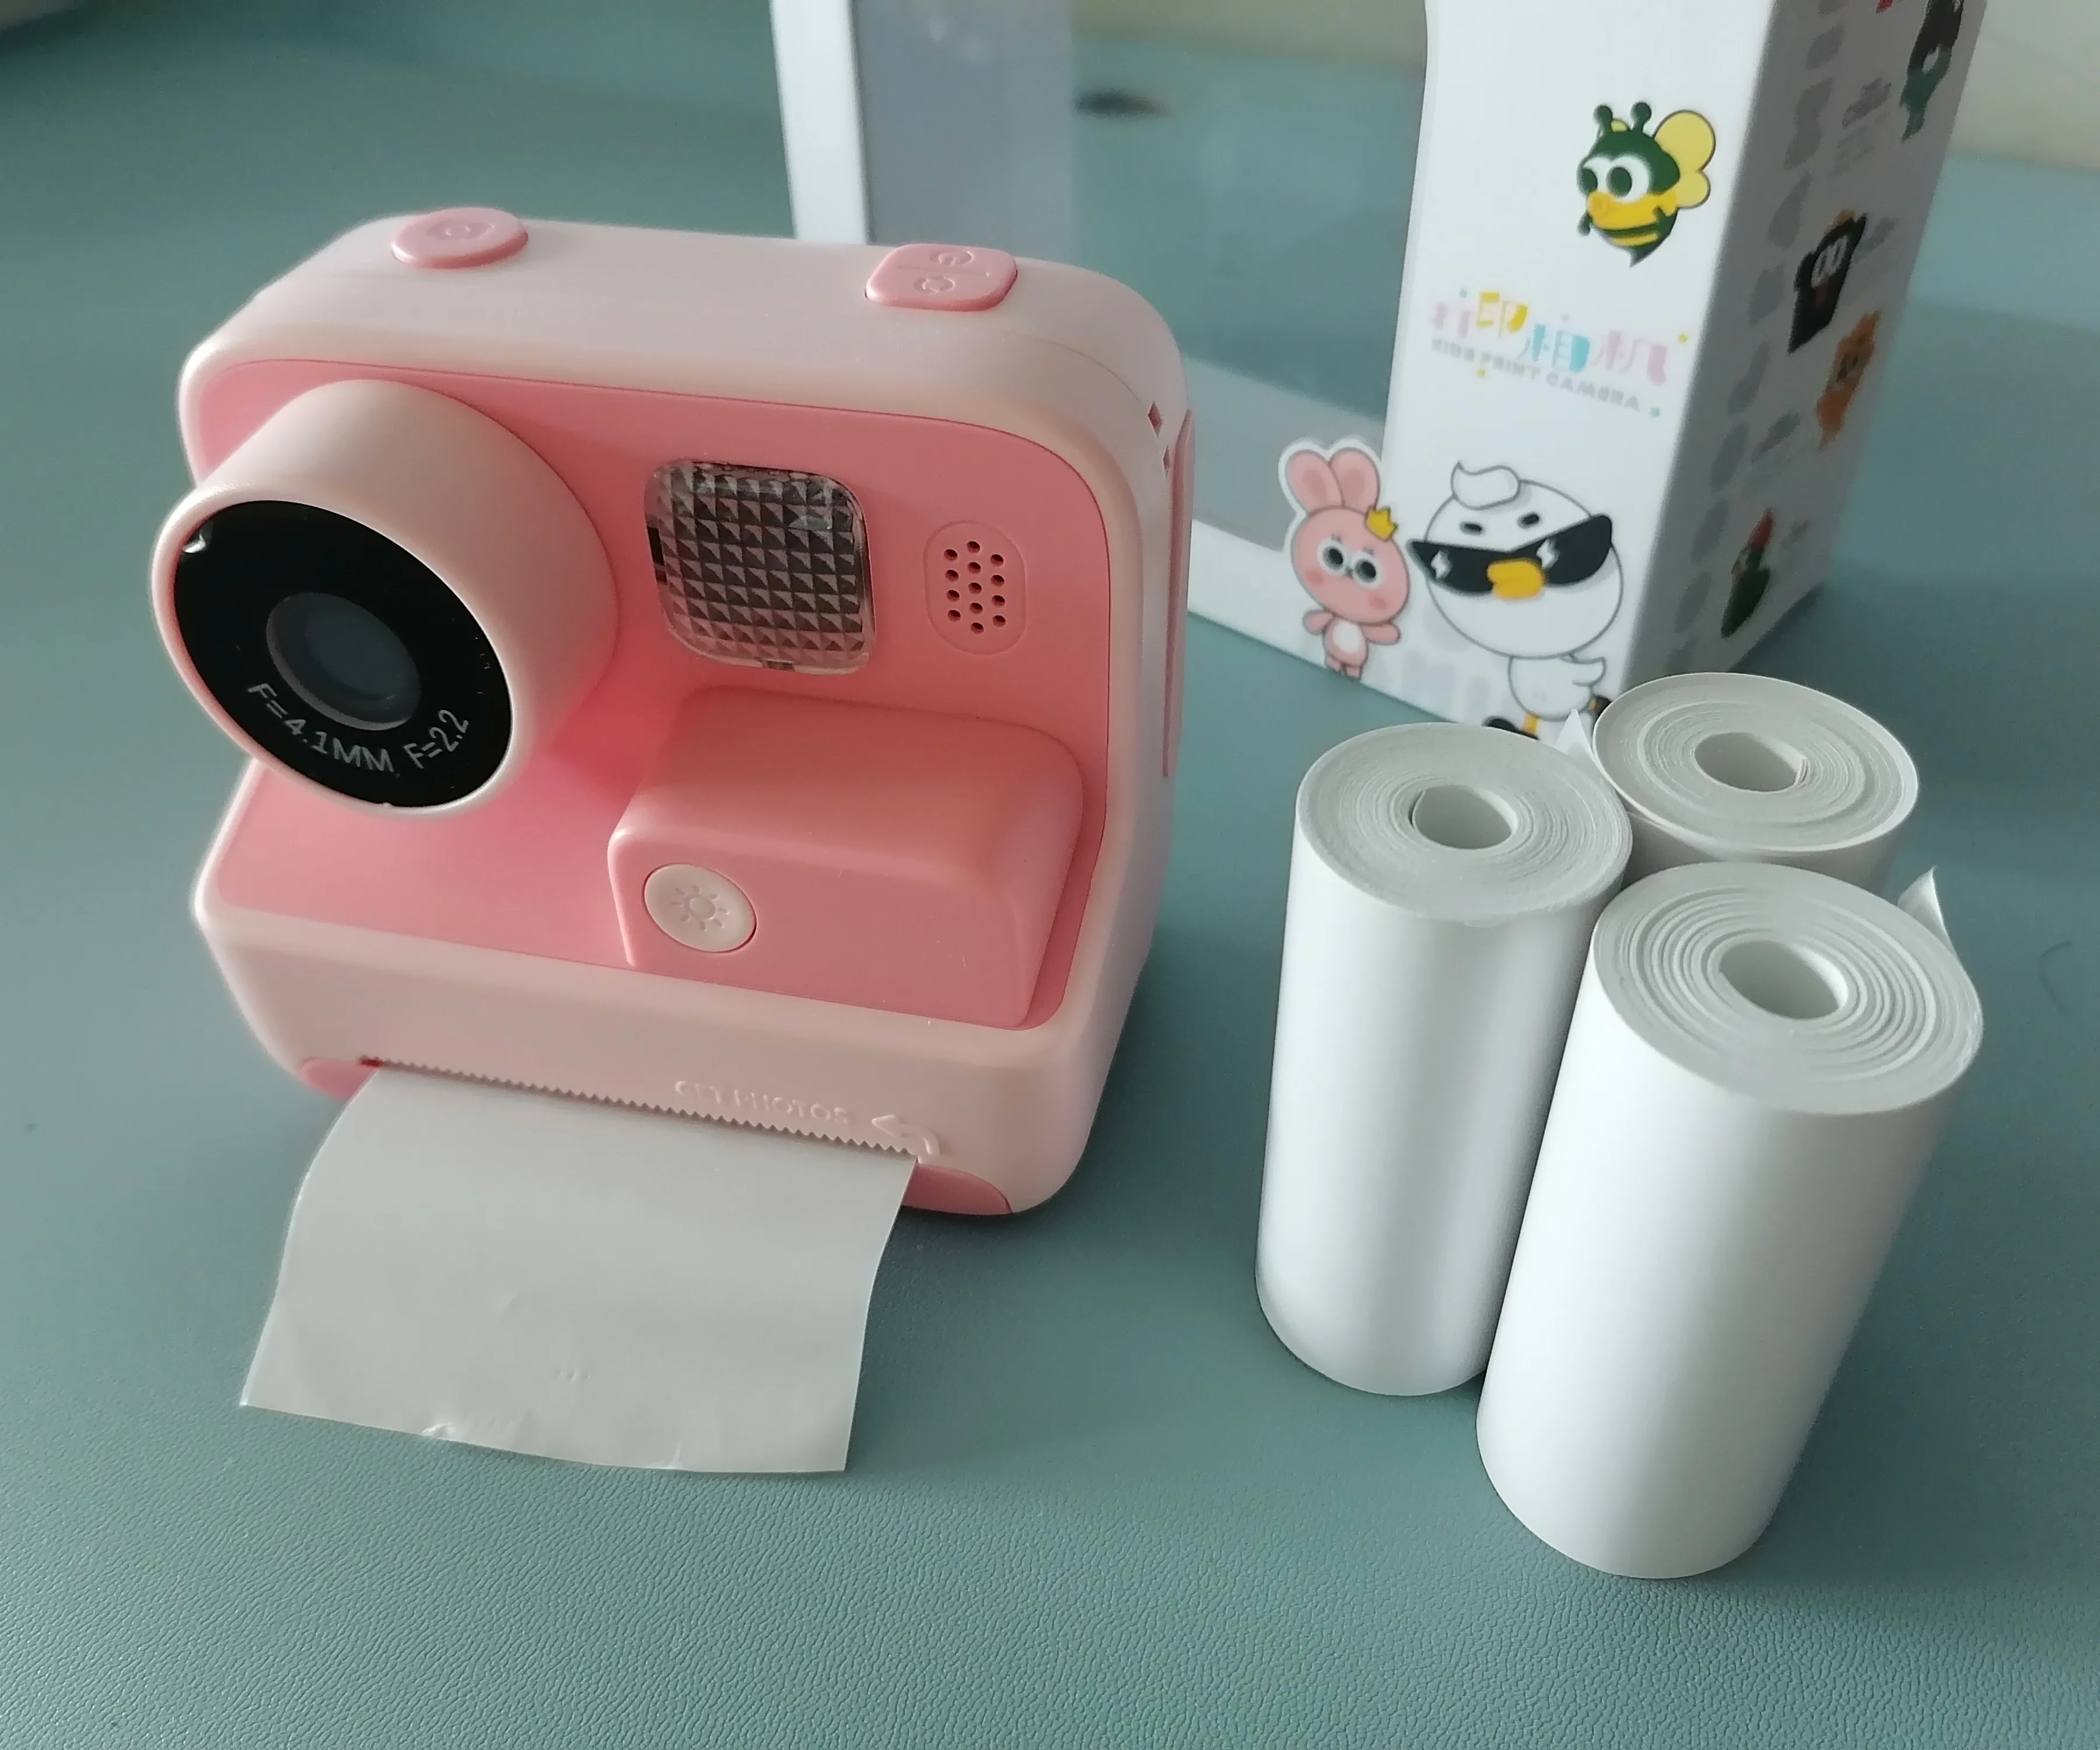 S09a531ddb72f4aa1b6d8ead827d603663 Instant Print Kids Camera 2.0" 1080P Video Photo with Thermal Print Paper